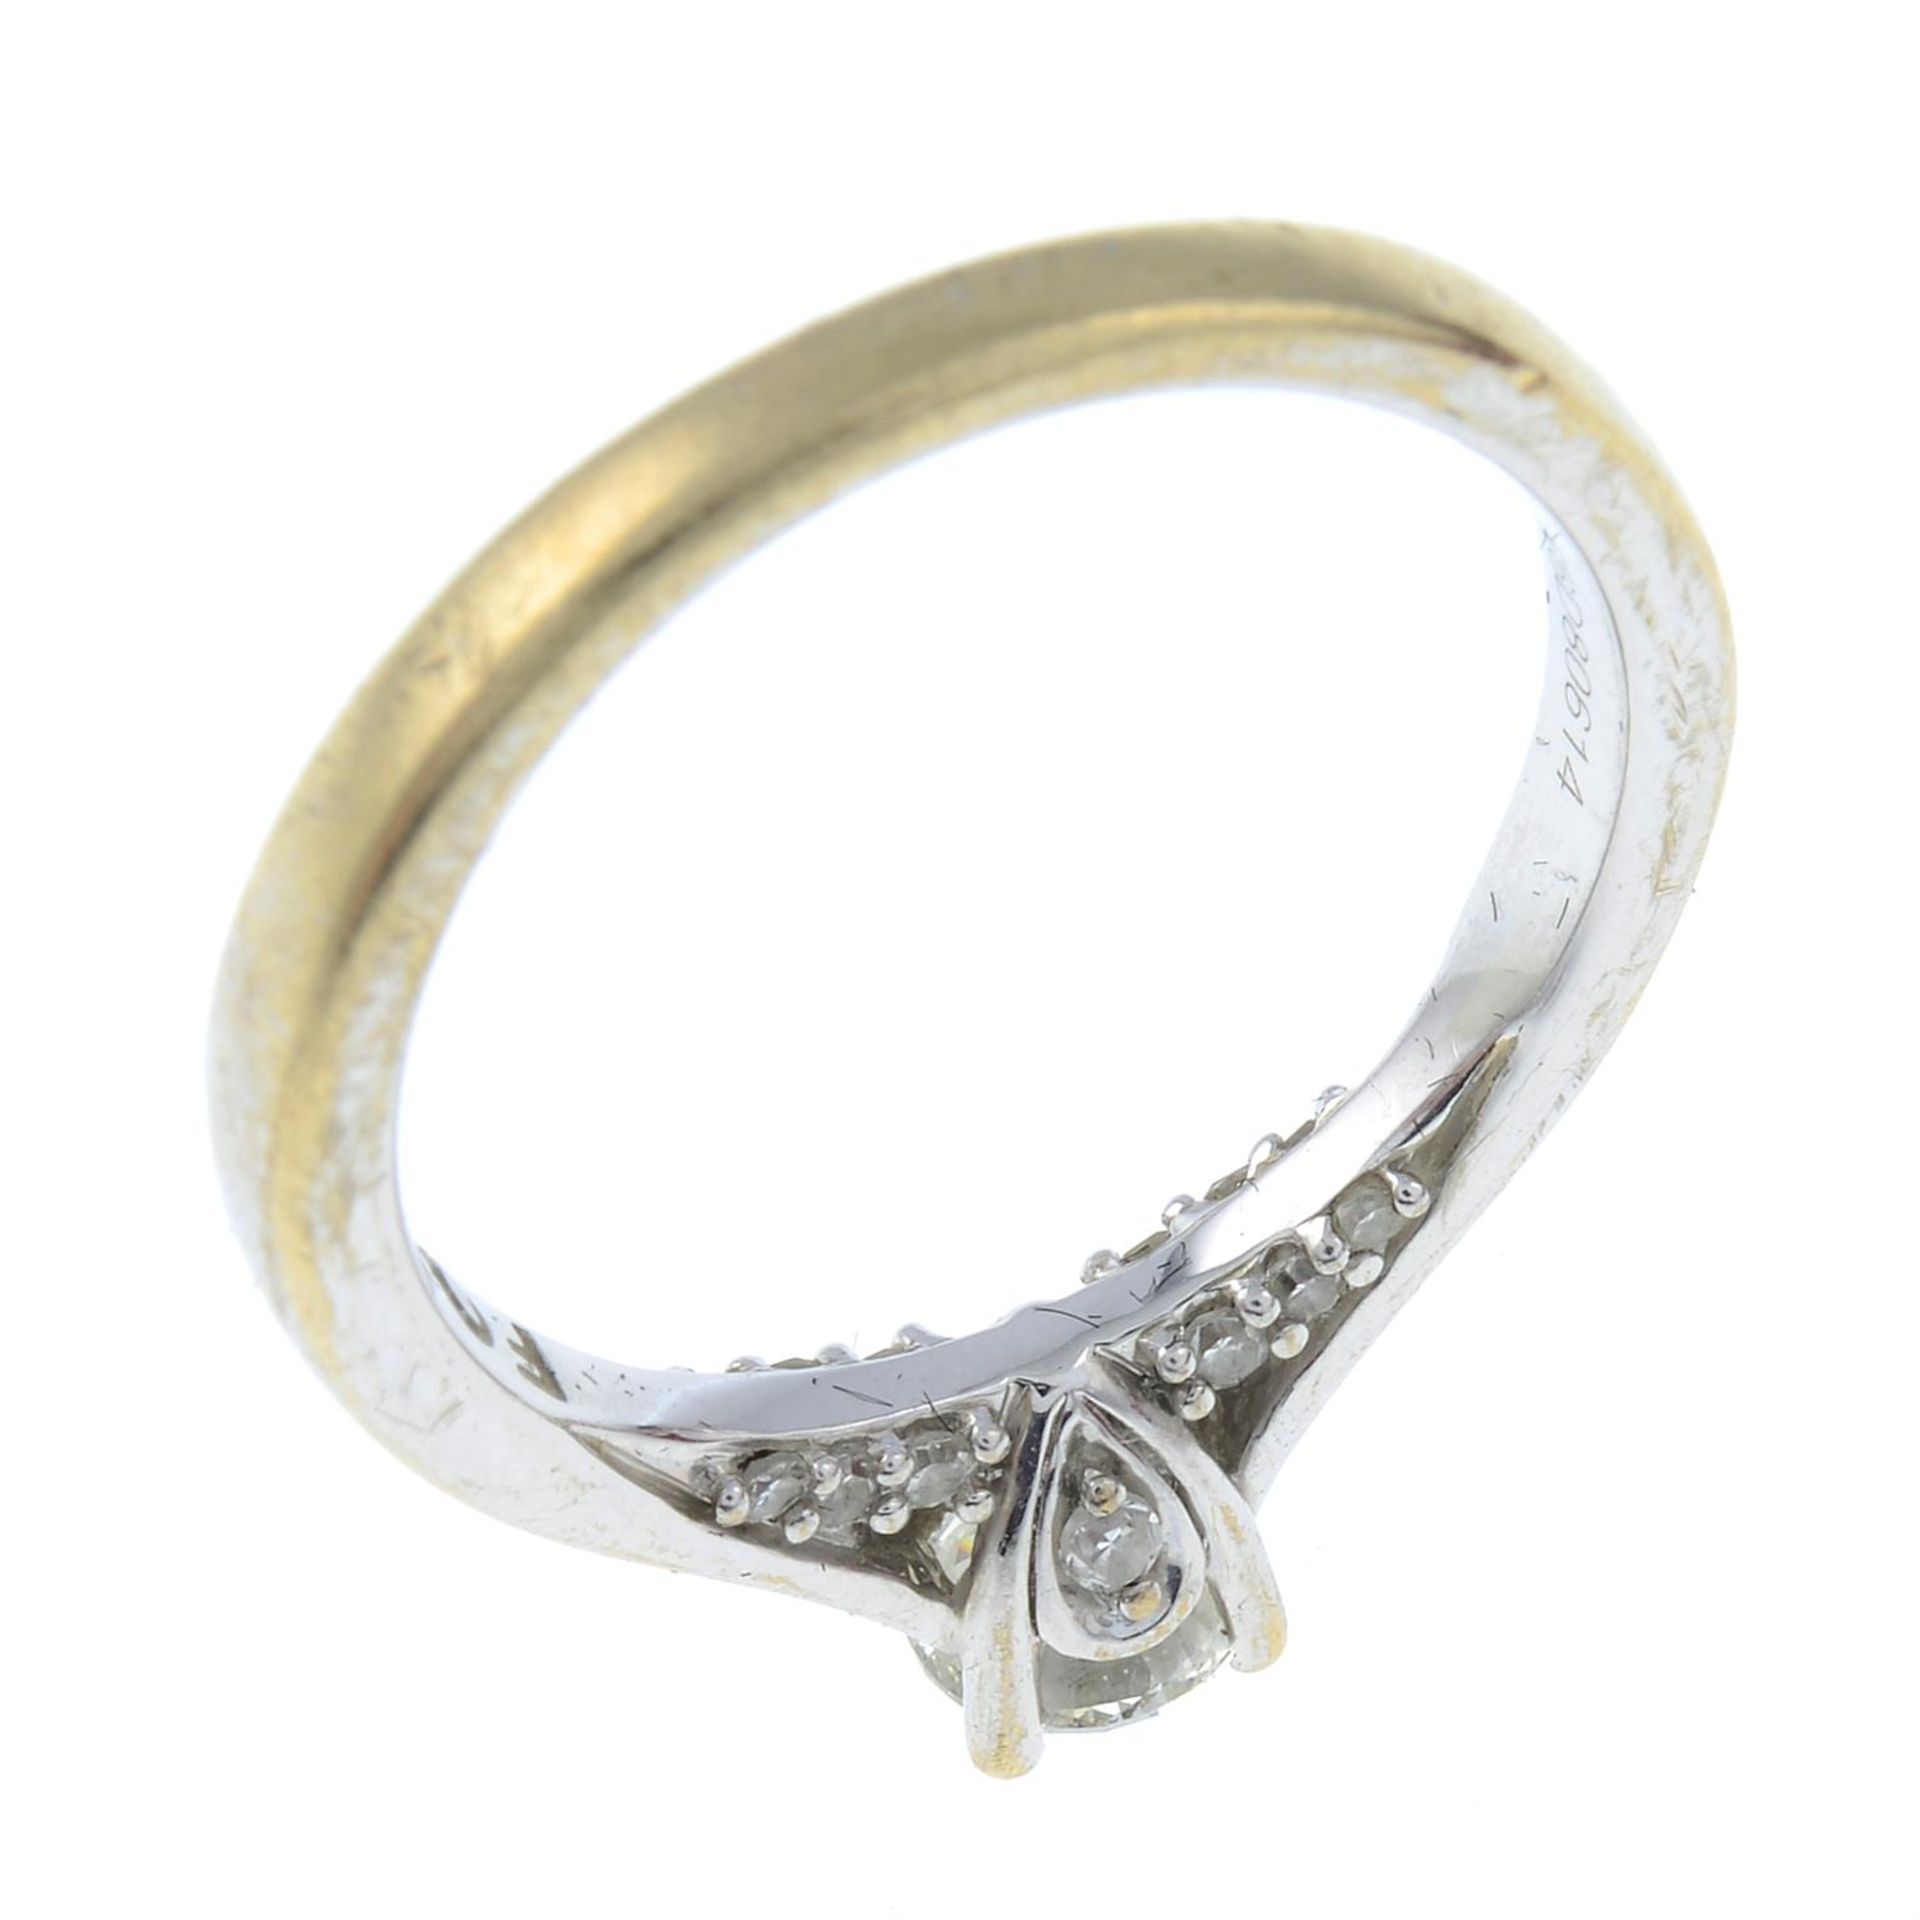 An 18ct gold brilliant-cut diamond ring, with pave-set diamond sides. - Image 3 of 4